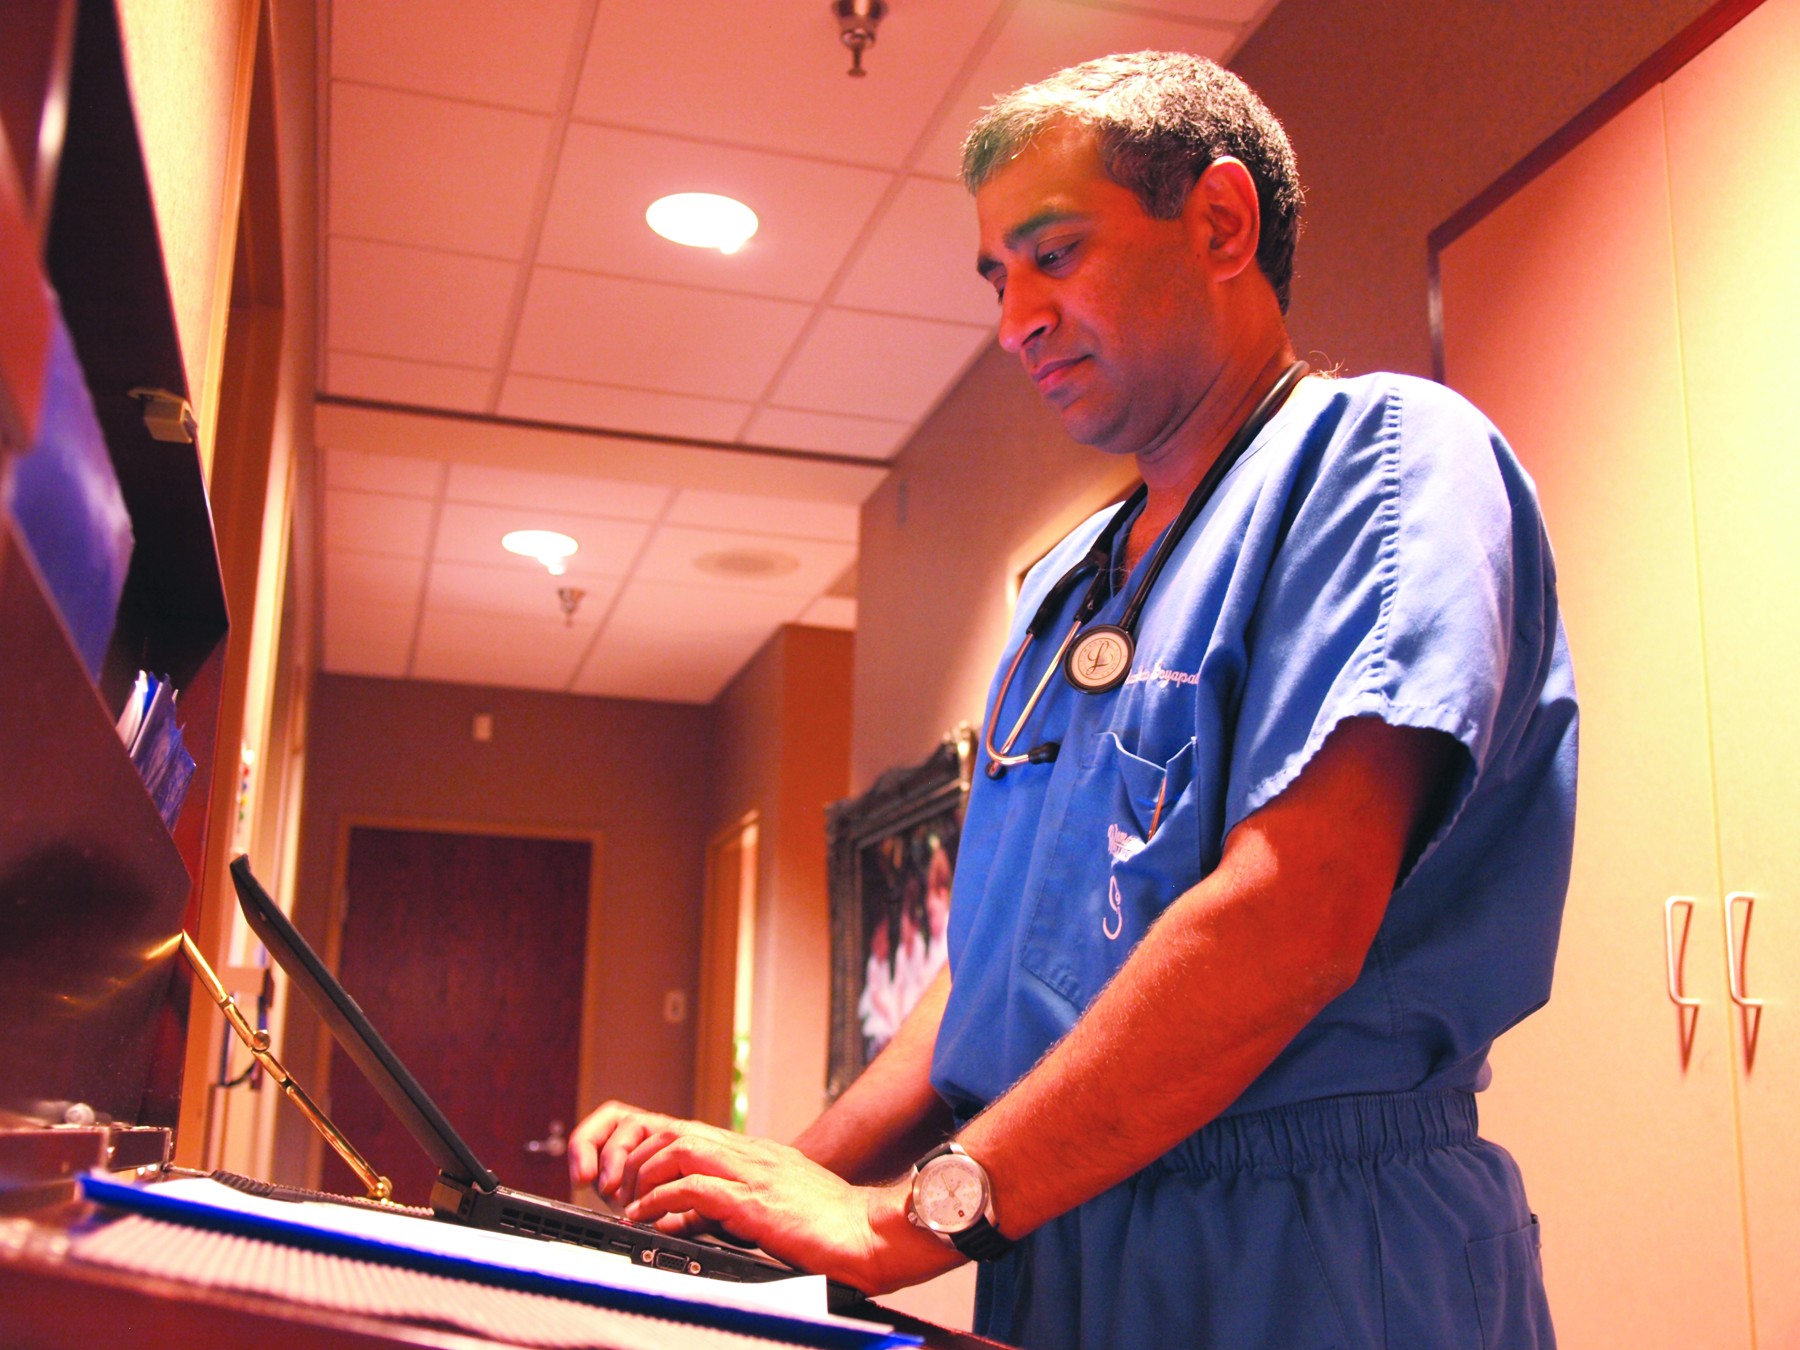 Dr. Madhav Boyapati enters patient information into the clinics electronic medical records.